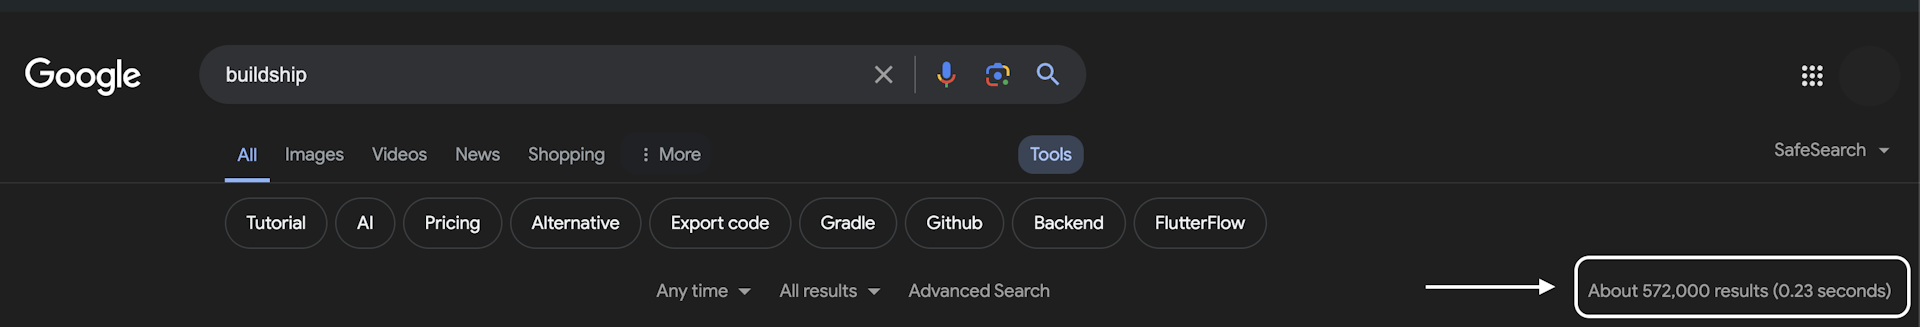 Buildship google search